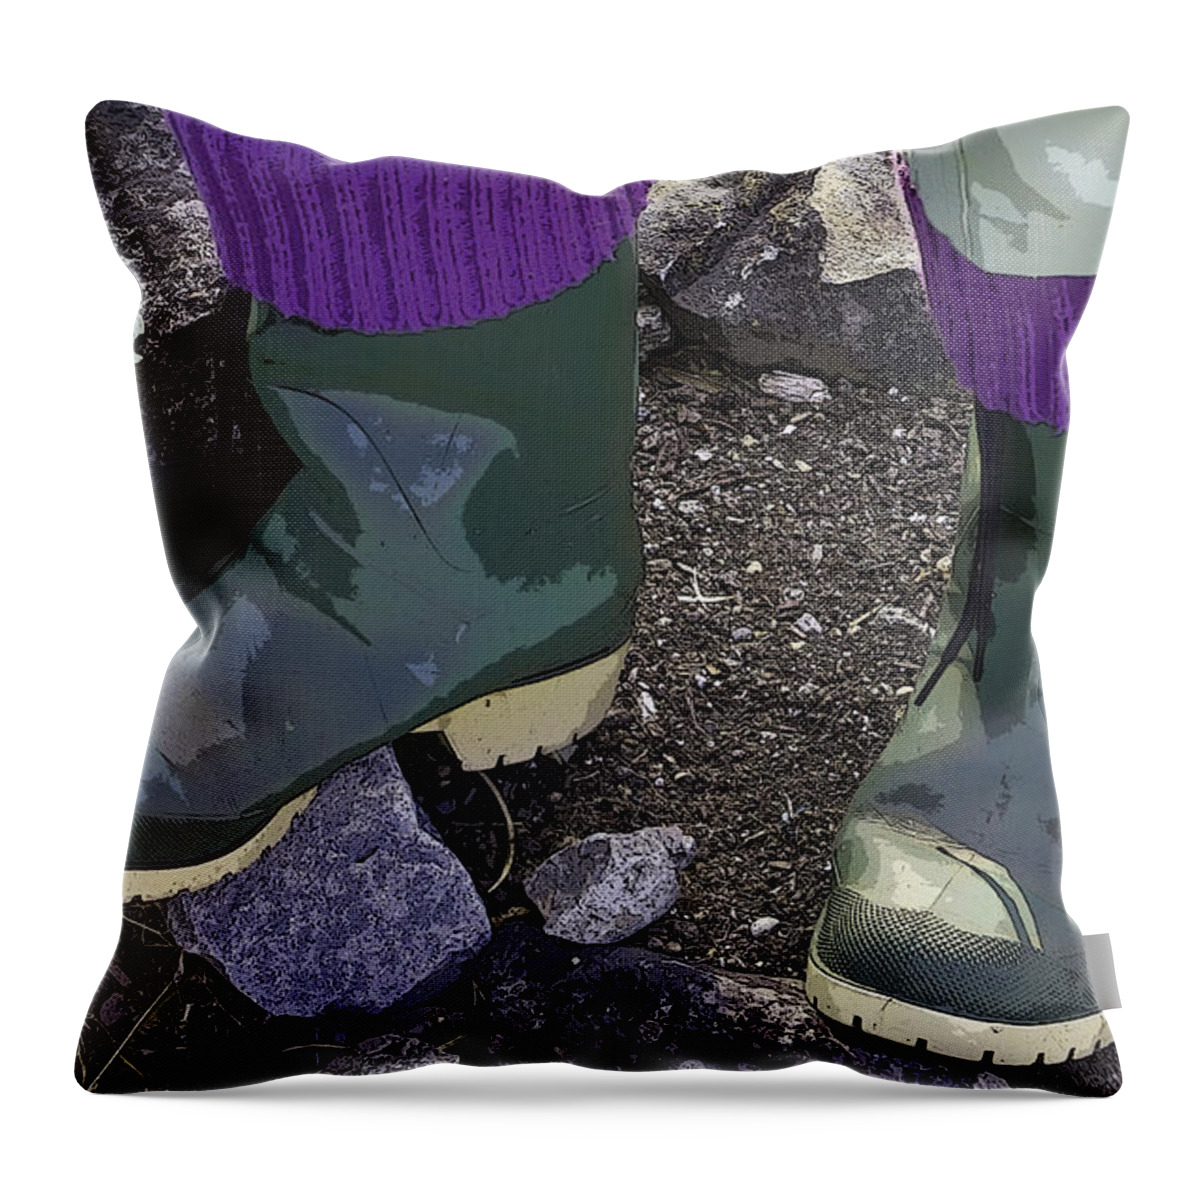 Photograph Throw Pillow featuring the photograph Gardener's Fashion Statement by Rhonda McDougall